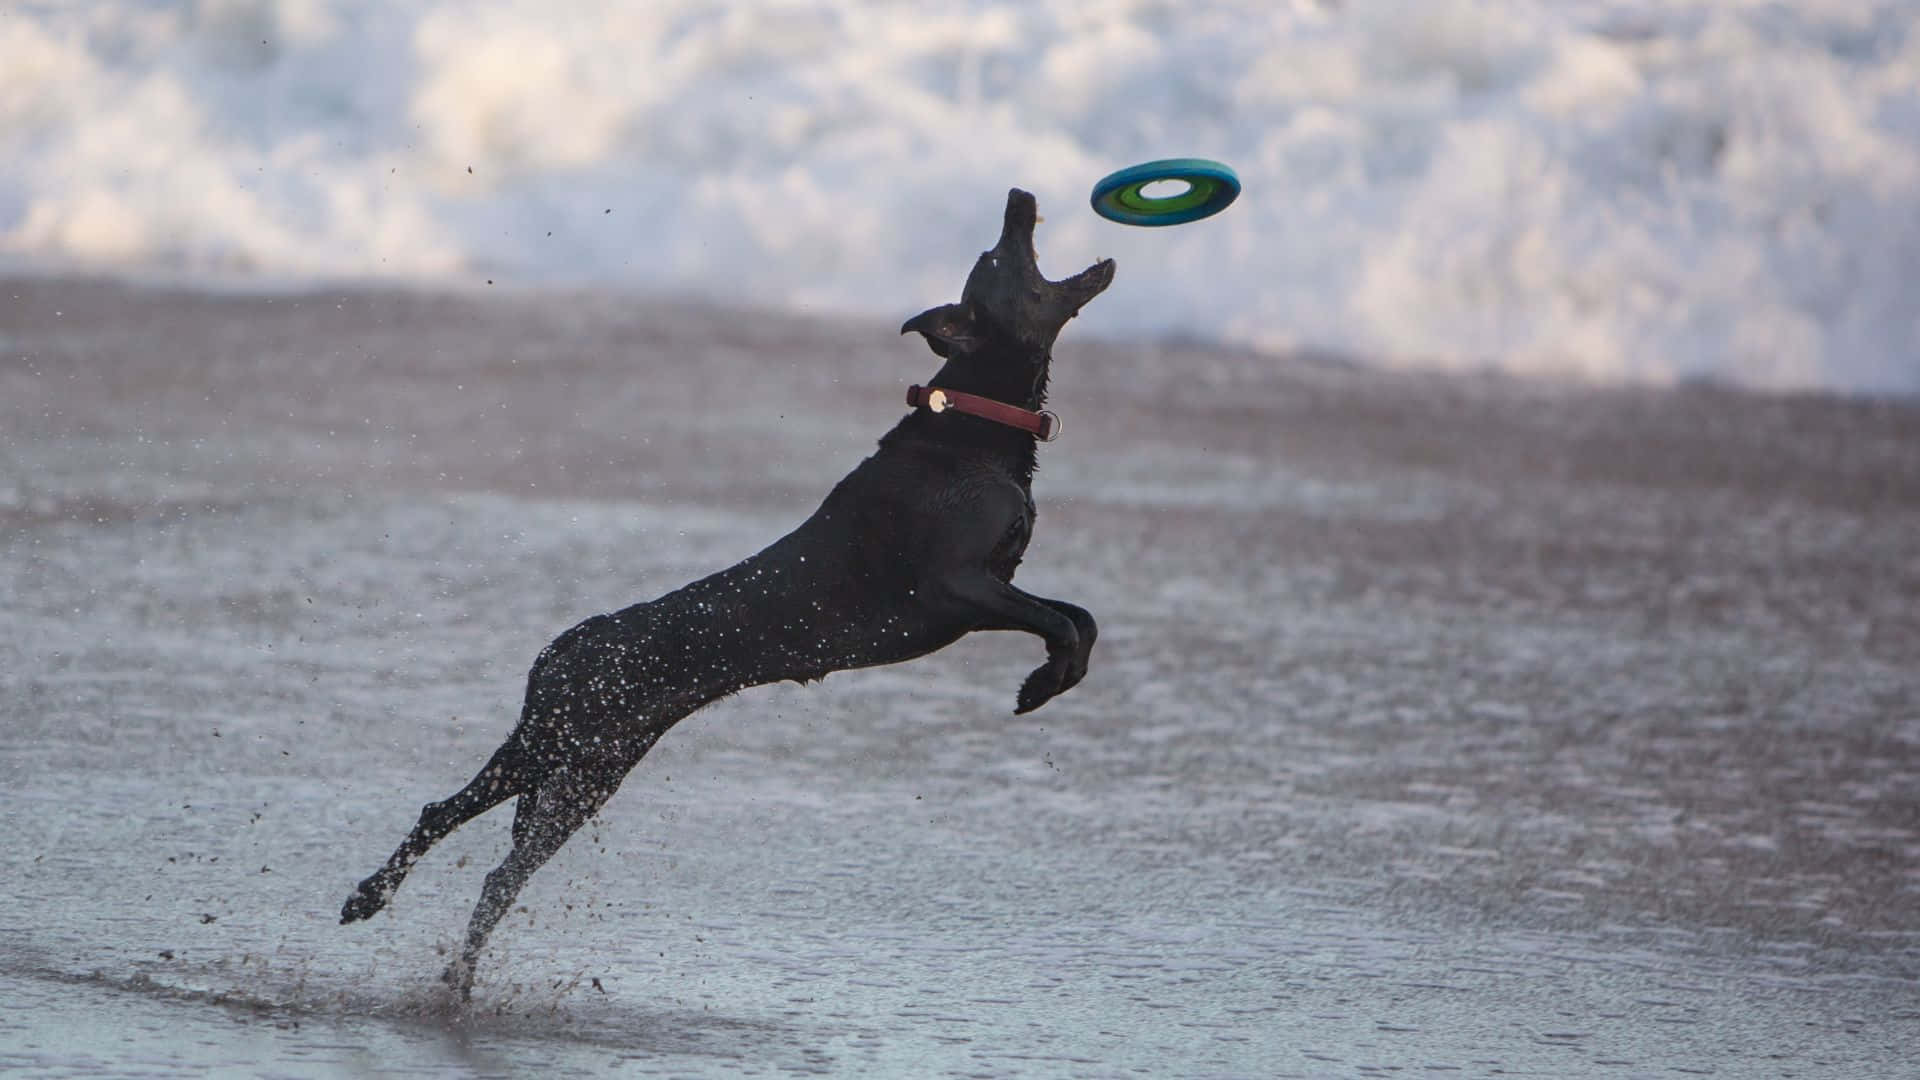 Get ready to catch some air and play some Frisbee!